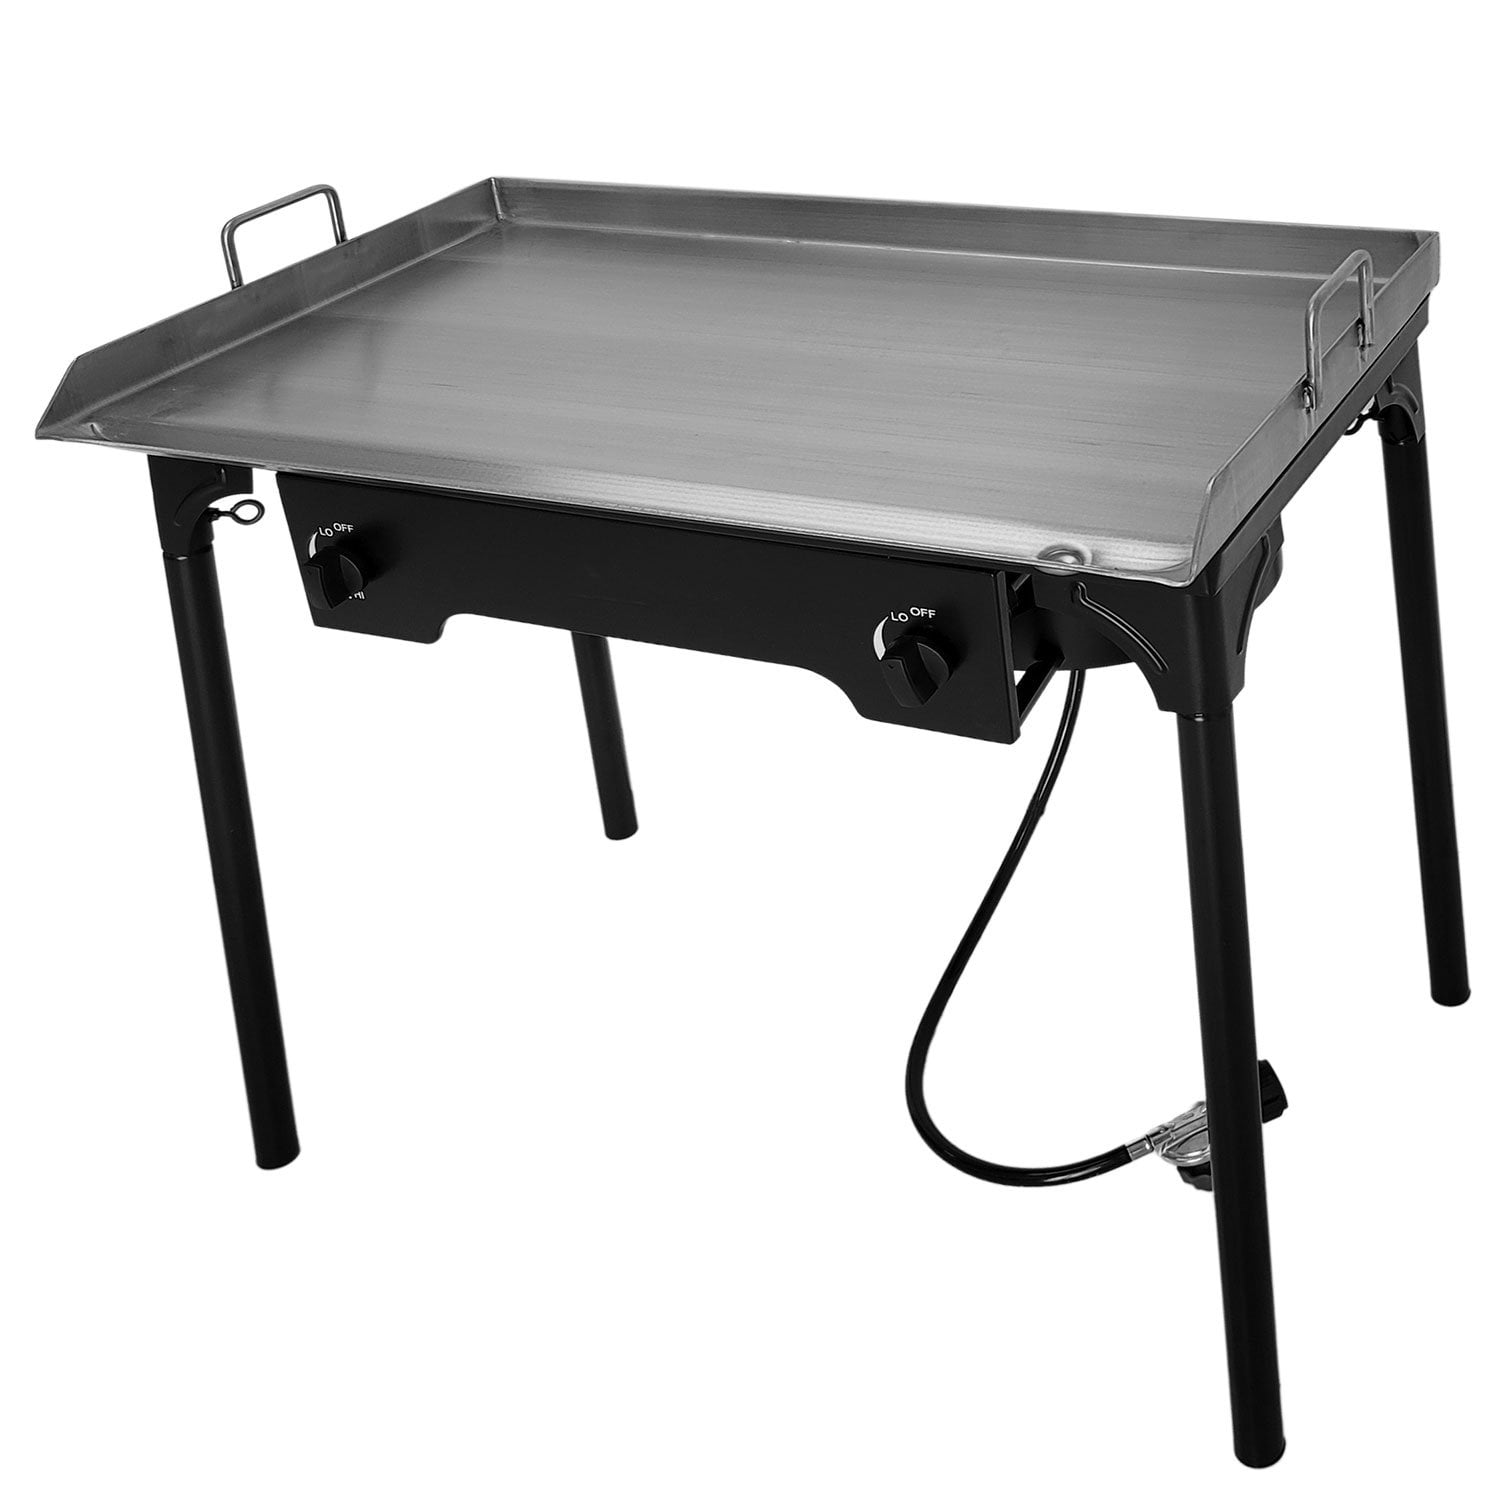 Hisencn 16 x 38 inch Flat Top Griddle for Camp Chef Three Burner Stove with  Oil